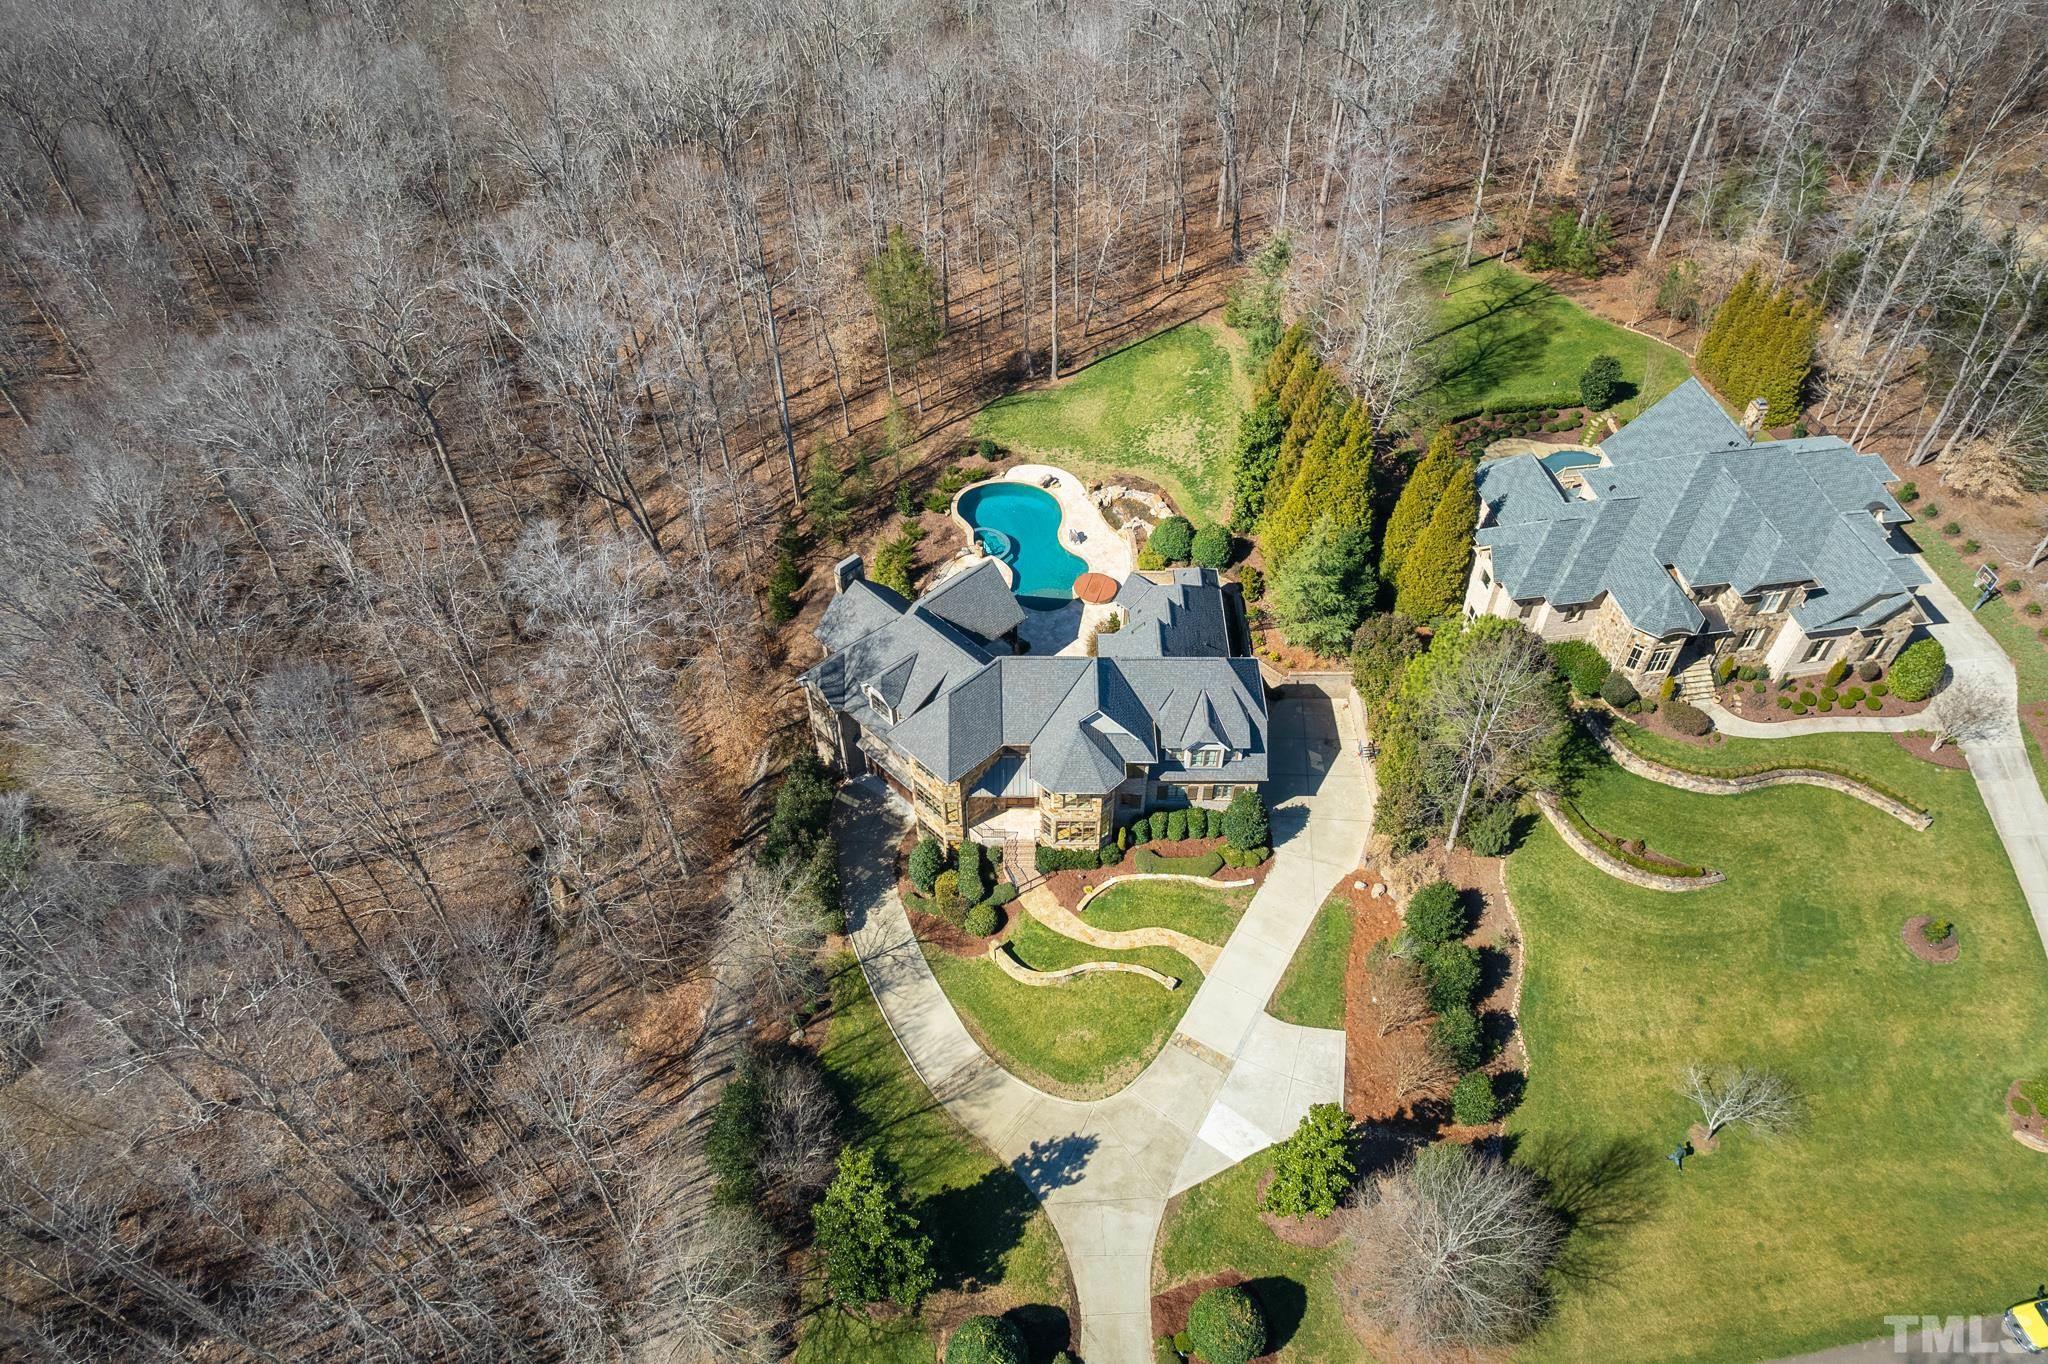 UPDATED! Built for entertaining & multi-generational living features resort-style saltwater pool, spa, outdoor kit, veranda + 5 car garage; Private yard backs onto Falls Lake Preserve -every day???s a staycation. Stunning chef???s kitchen w/Wolf range